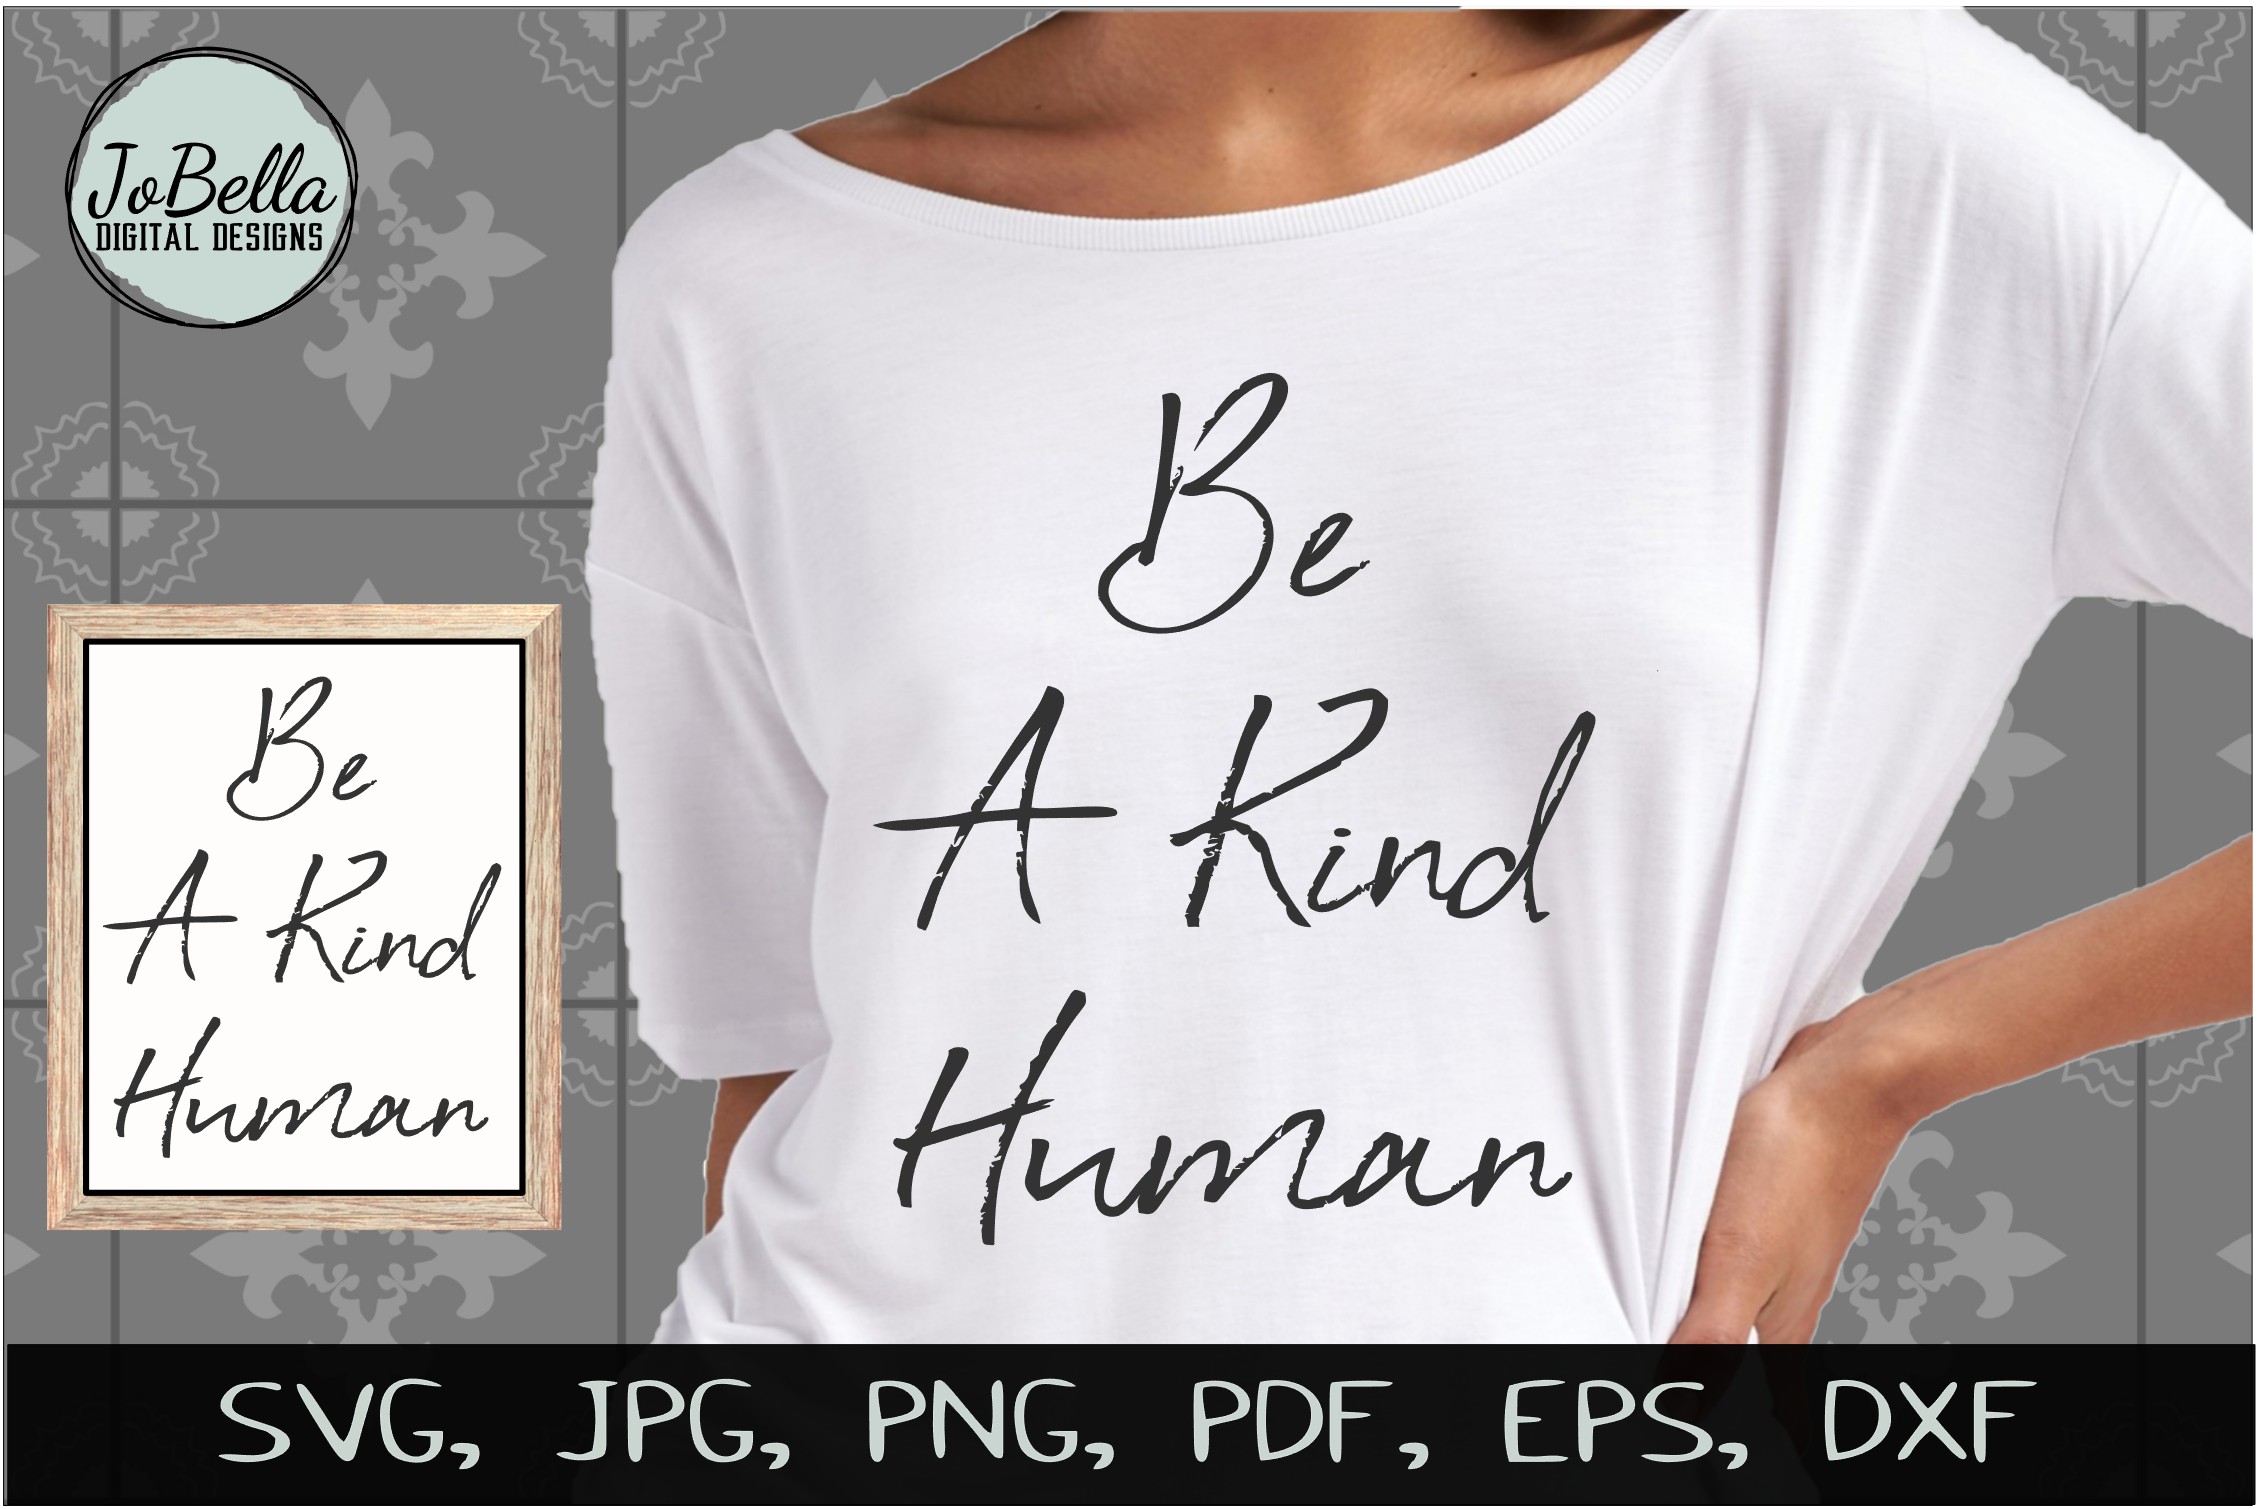 Download The Kindness SVG Bundle, Sublimation PNGs, and Printables ...